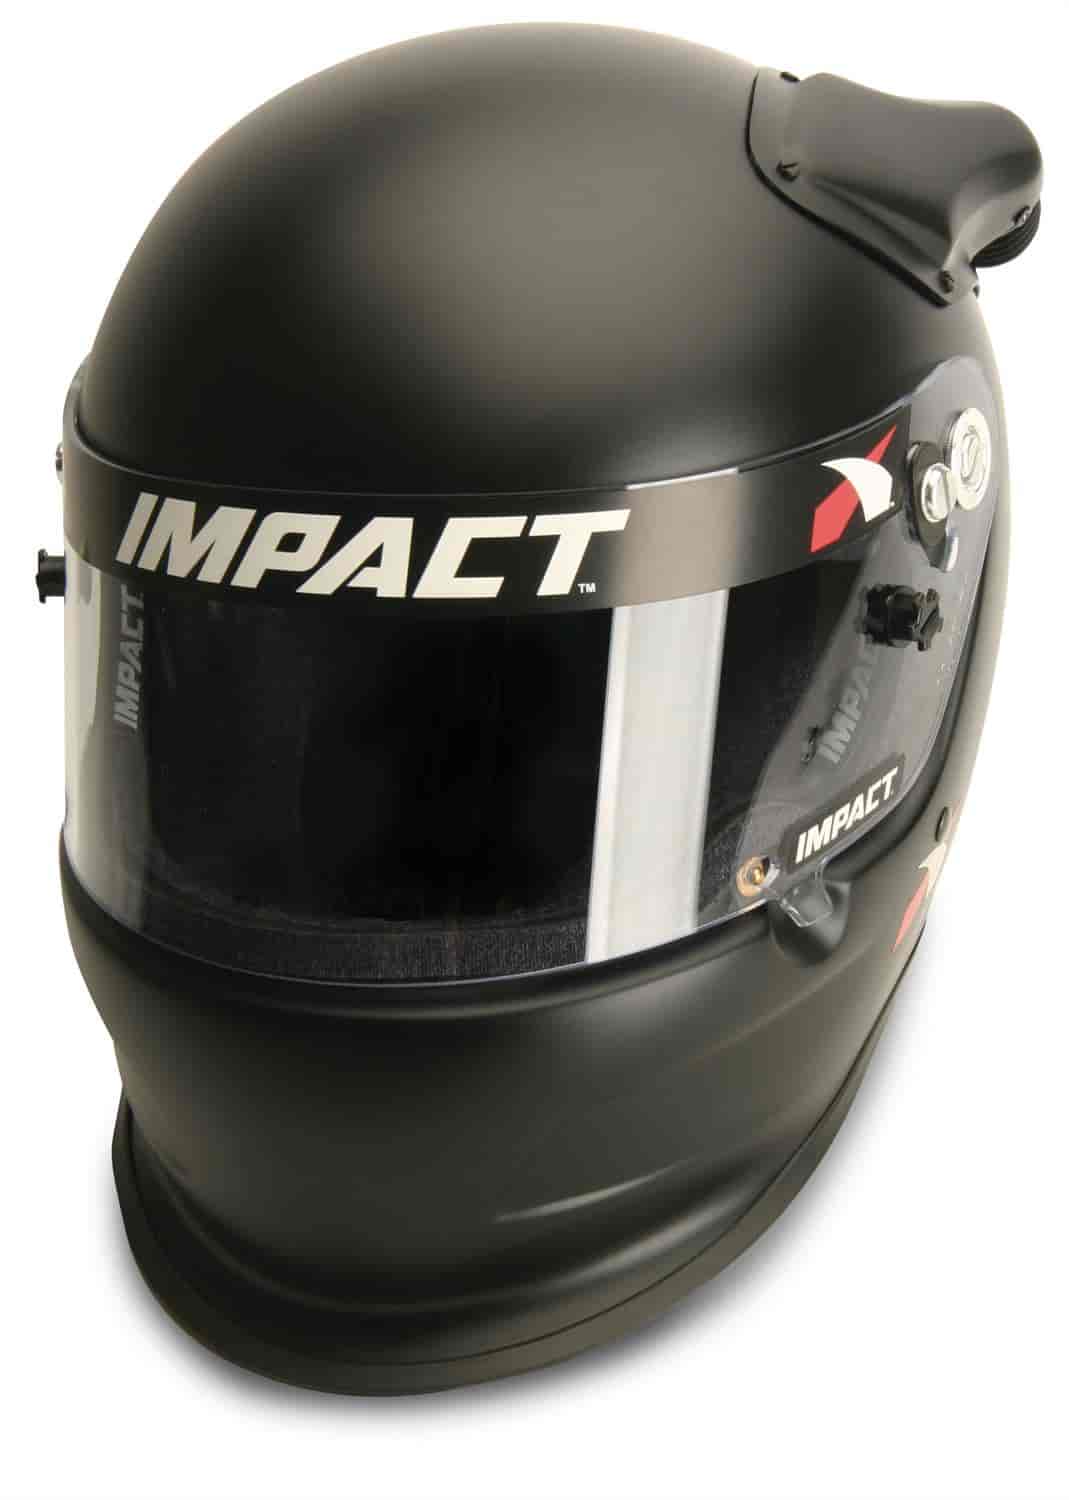 Super Charger OS20 Helmet SA2020 Certified